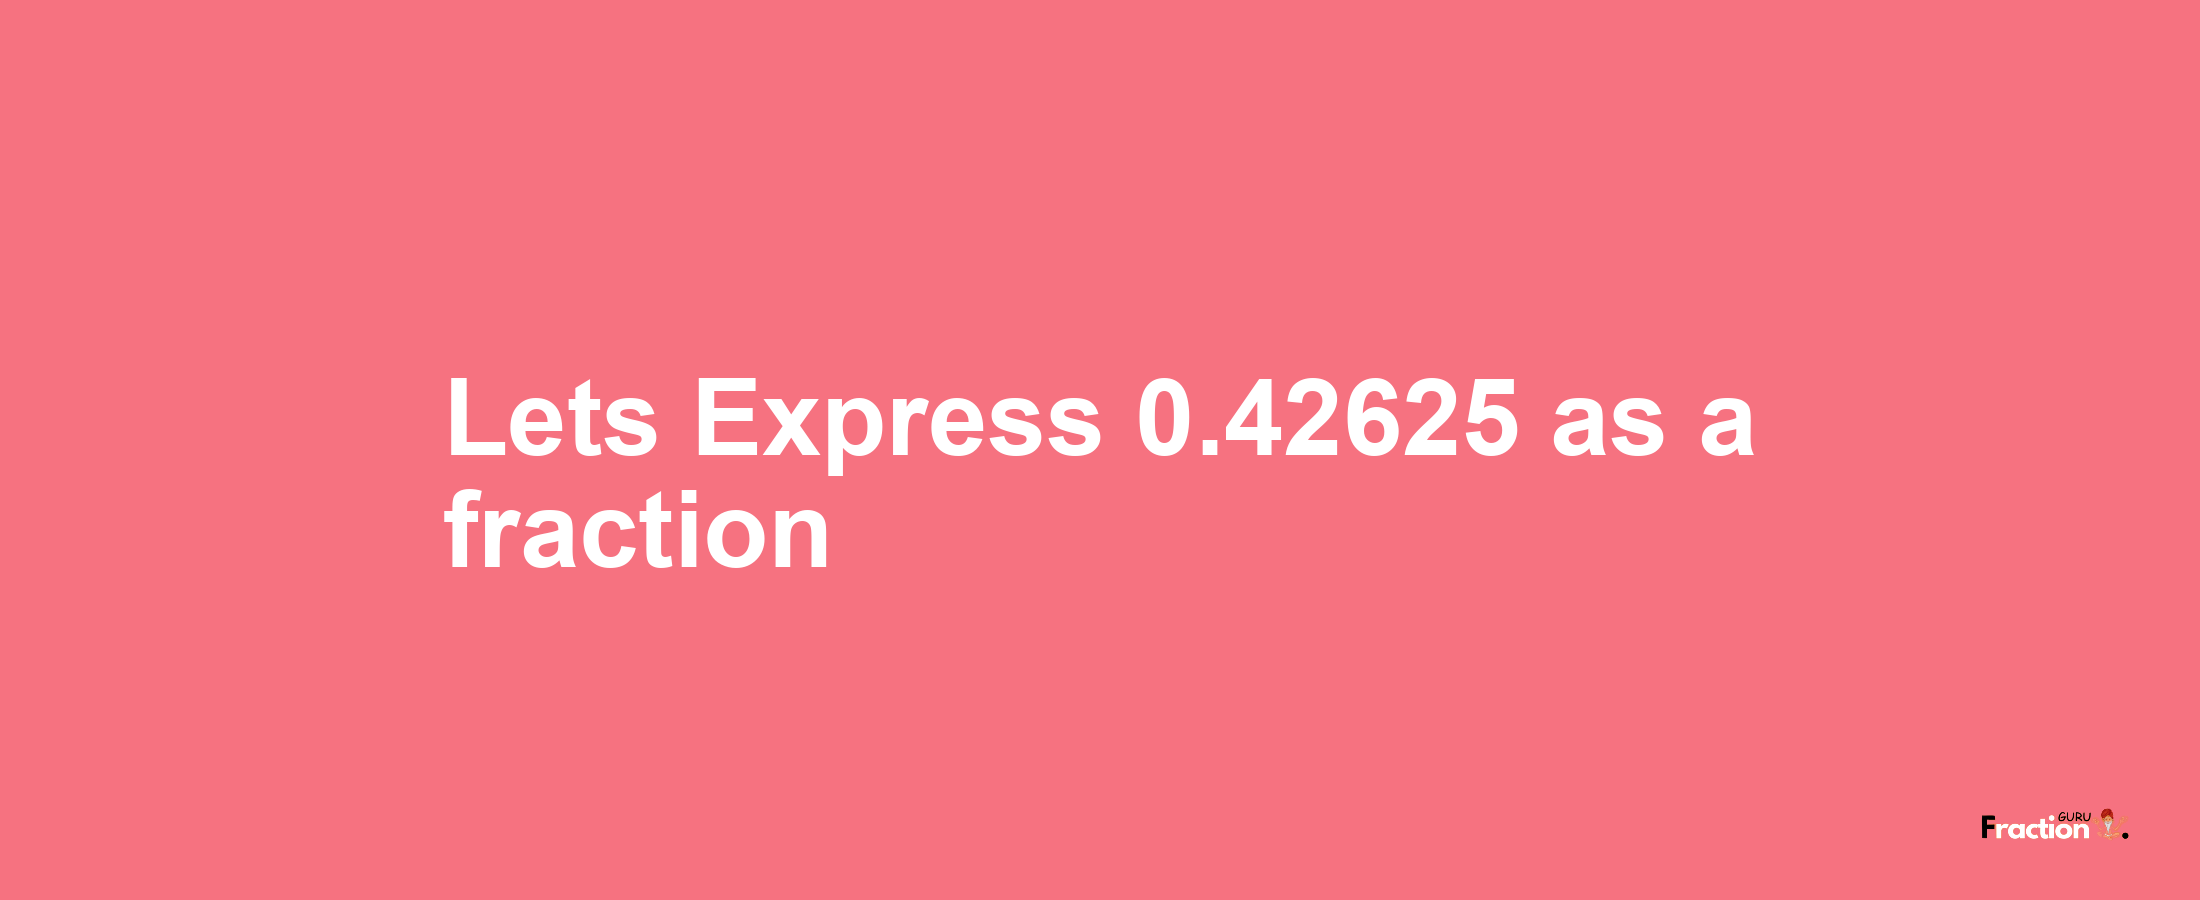 Lets Express 0.42625 as afraction